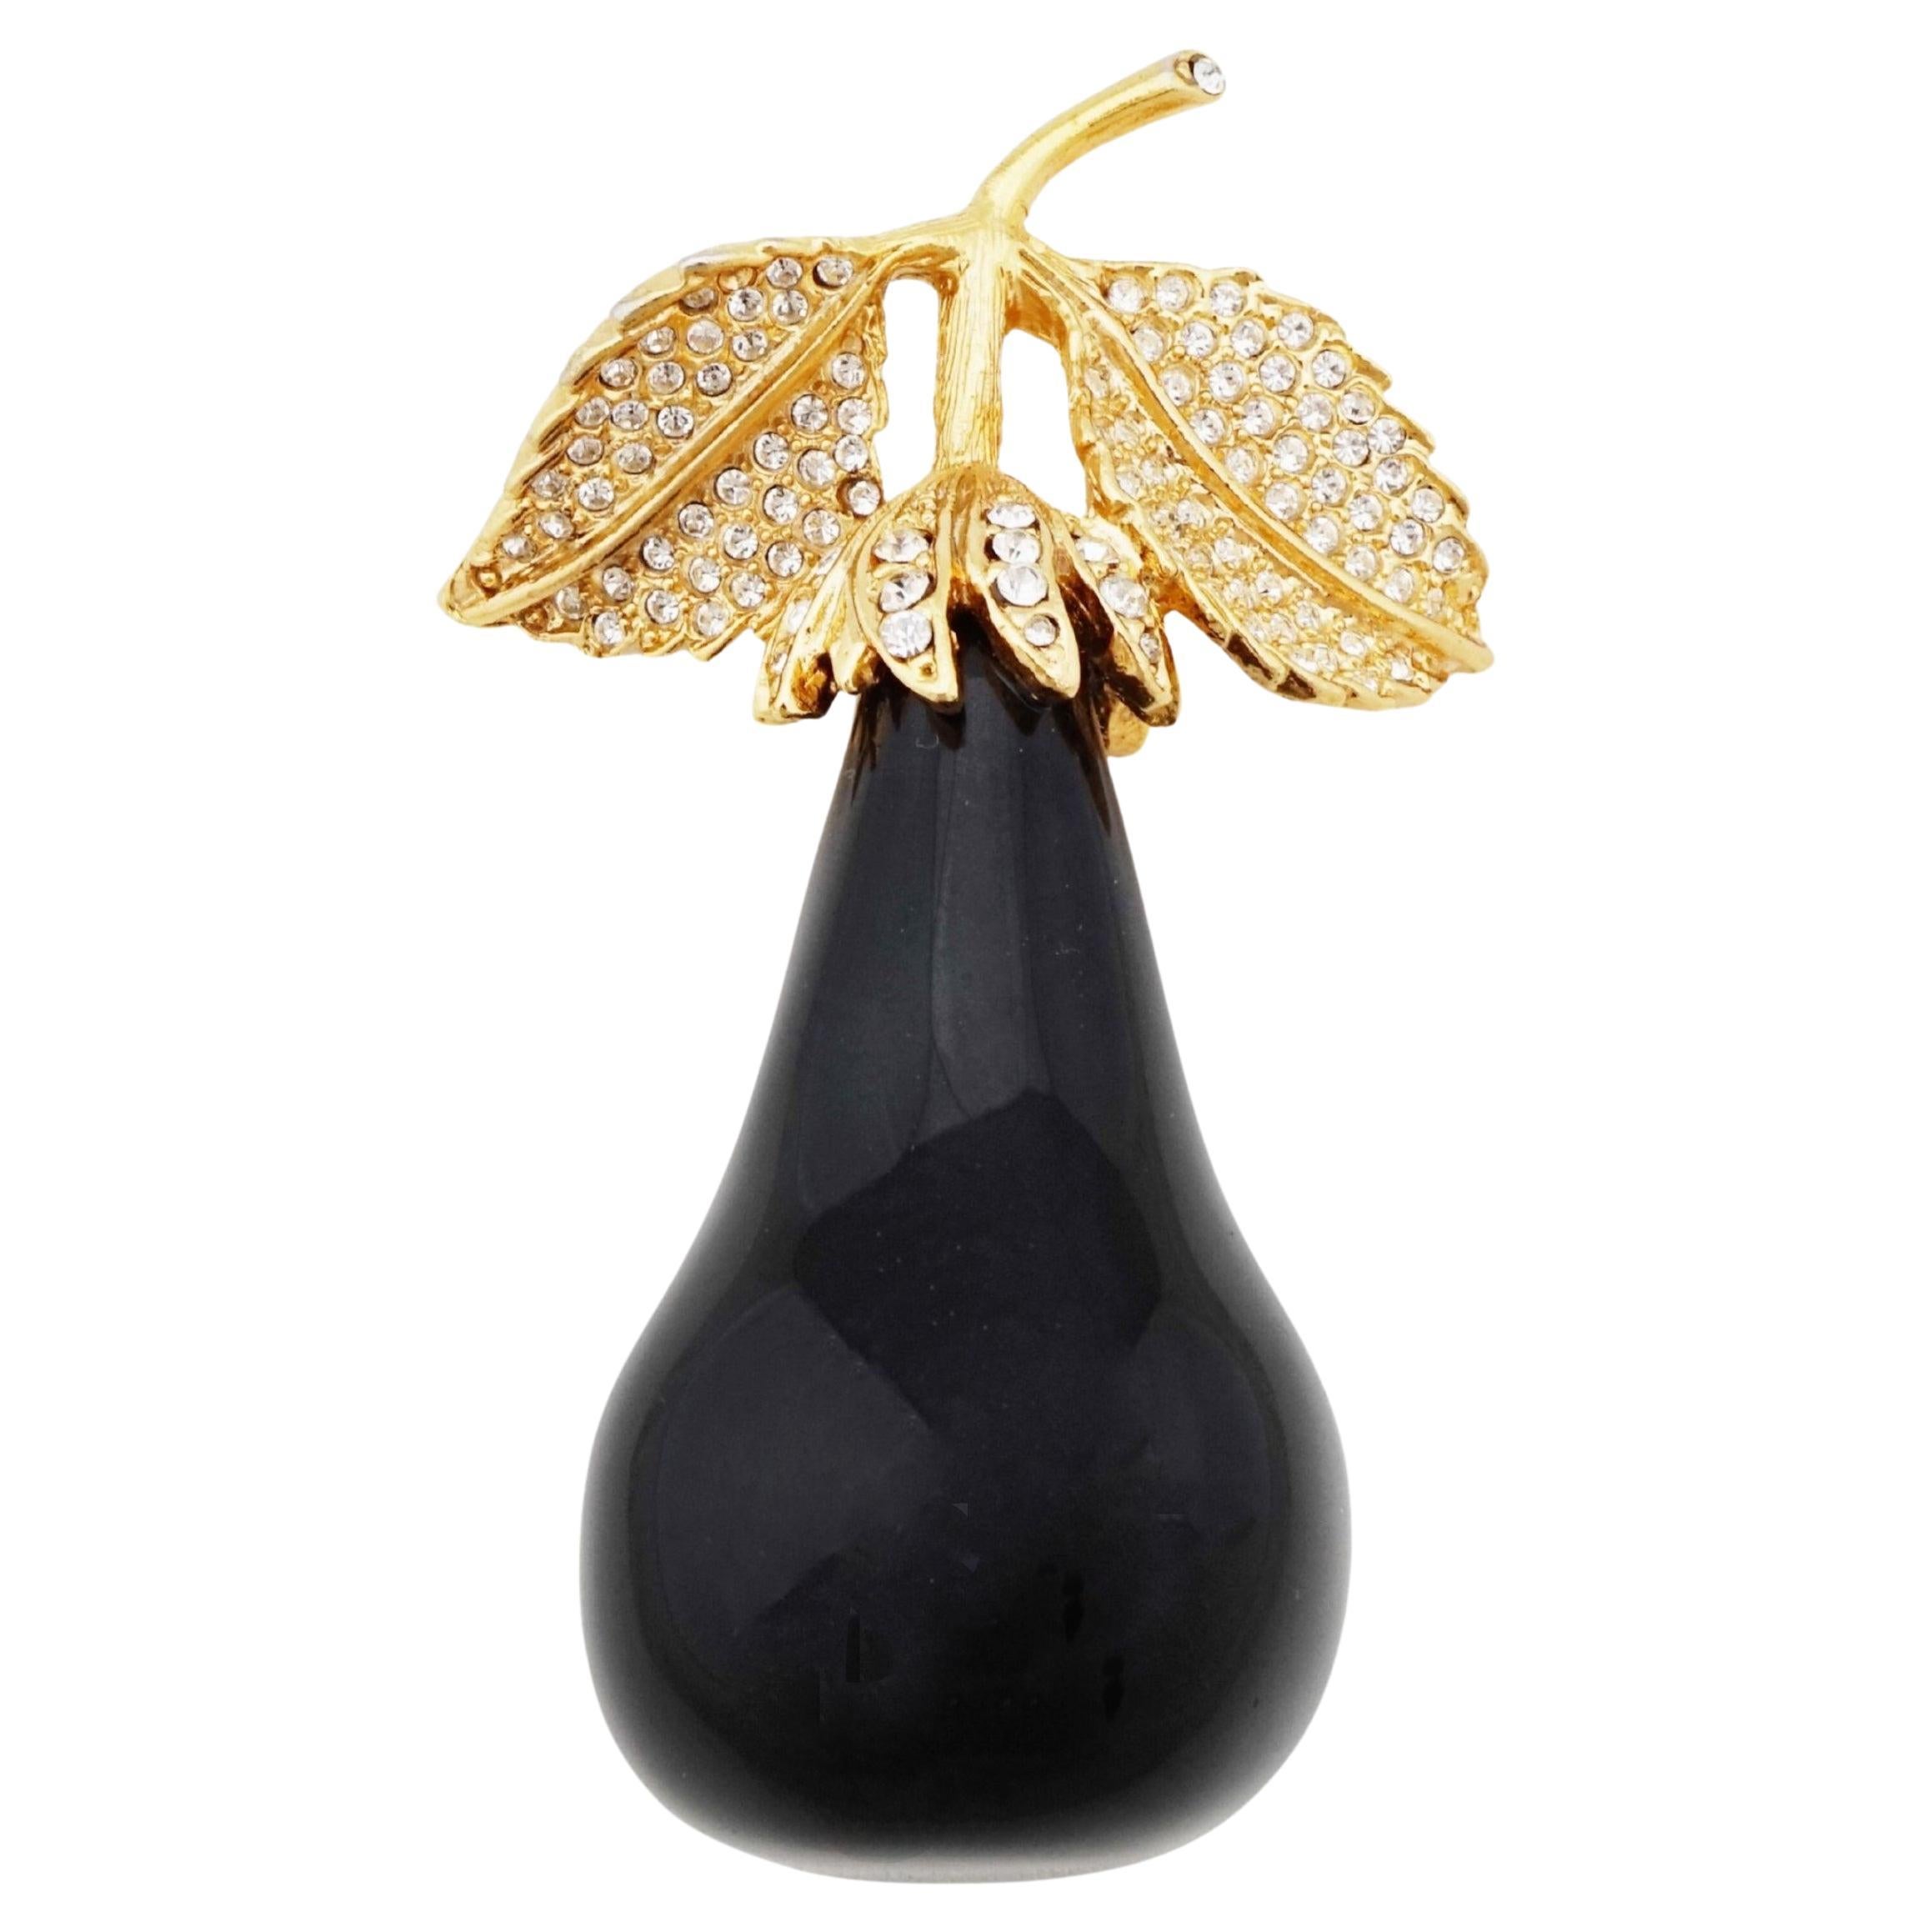 Black Lucite Pear Brooch With Rhinestone Details By Kenneth Jay Lane, 1990s For Sale